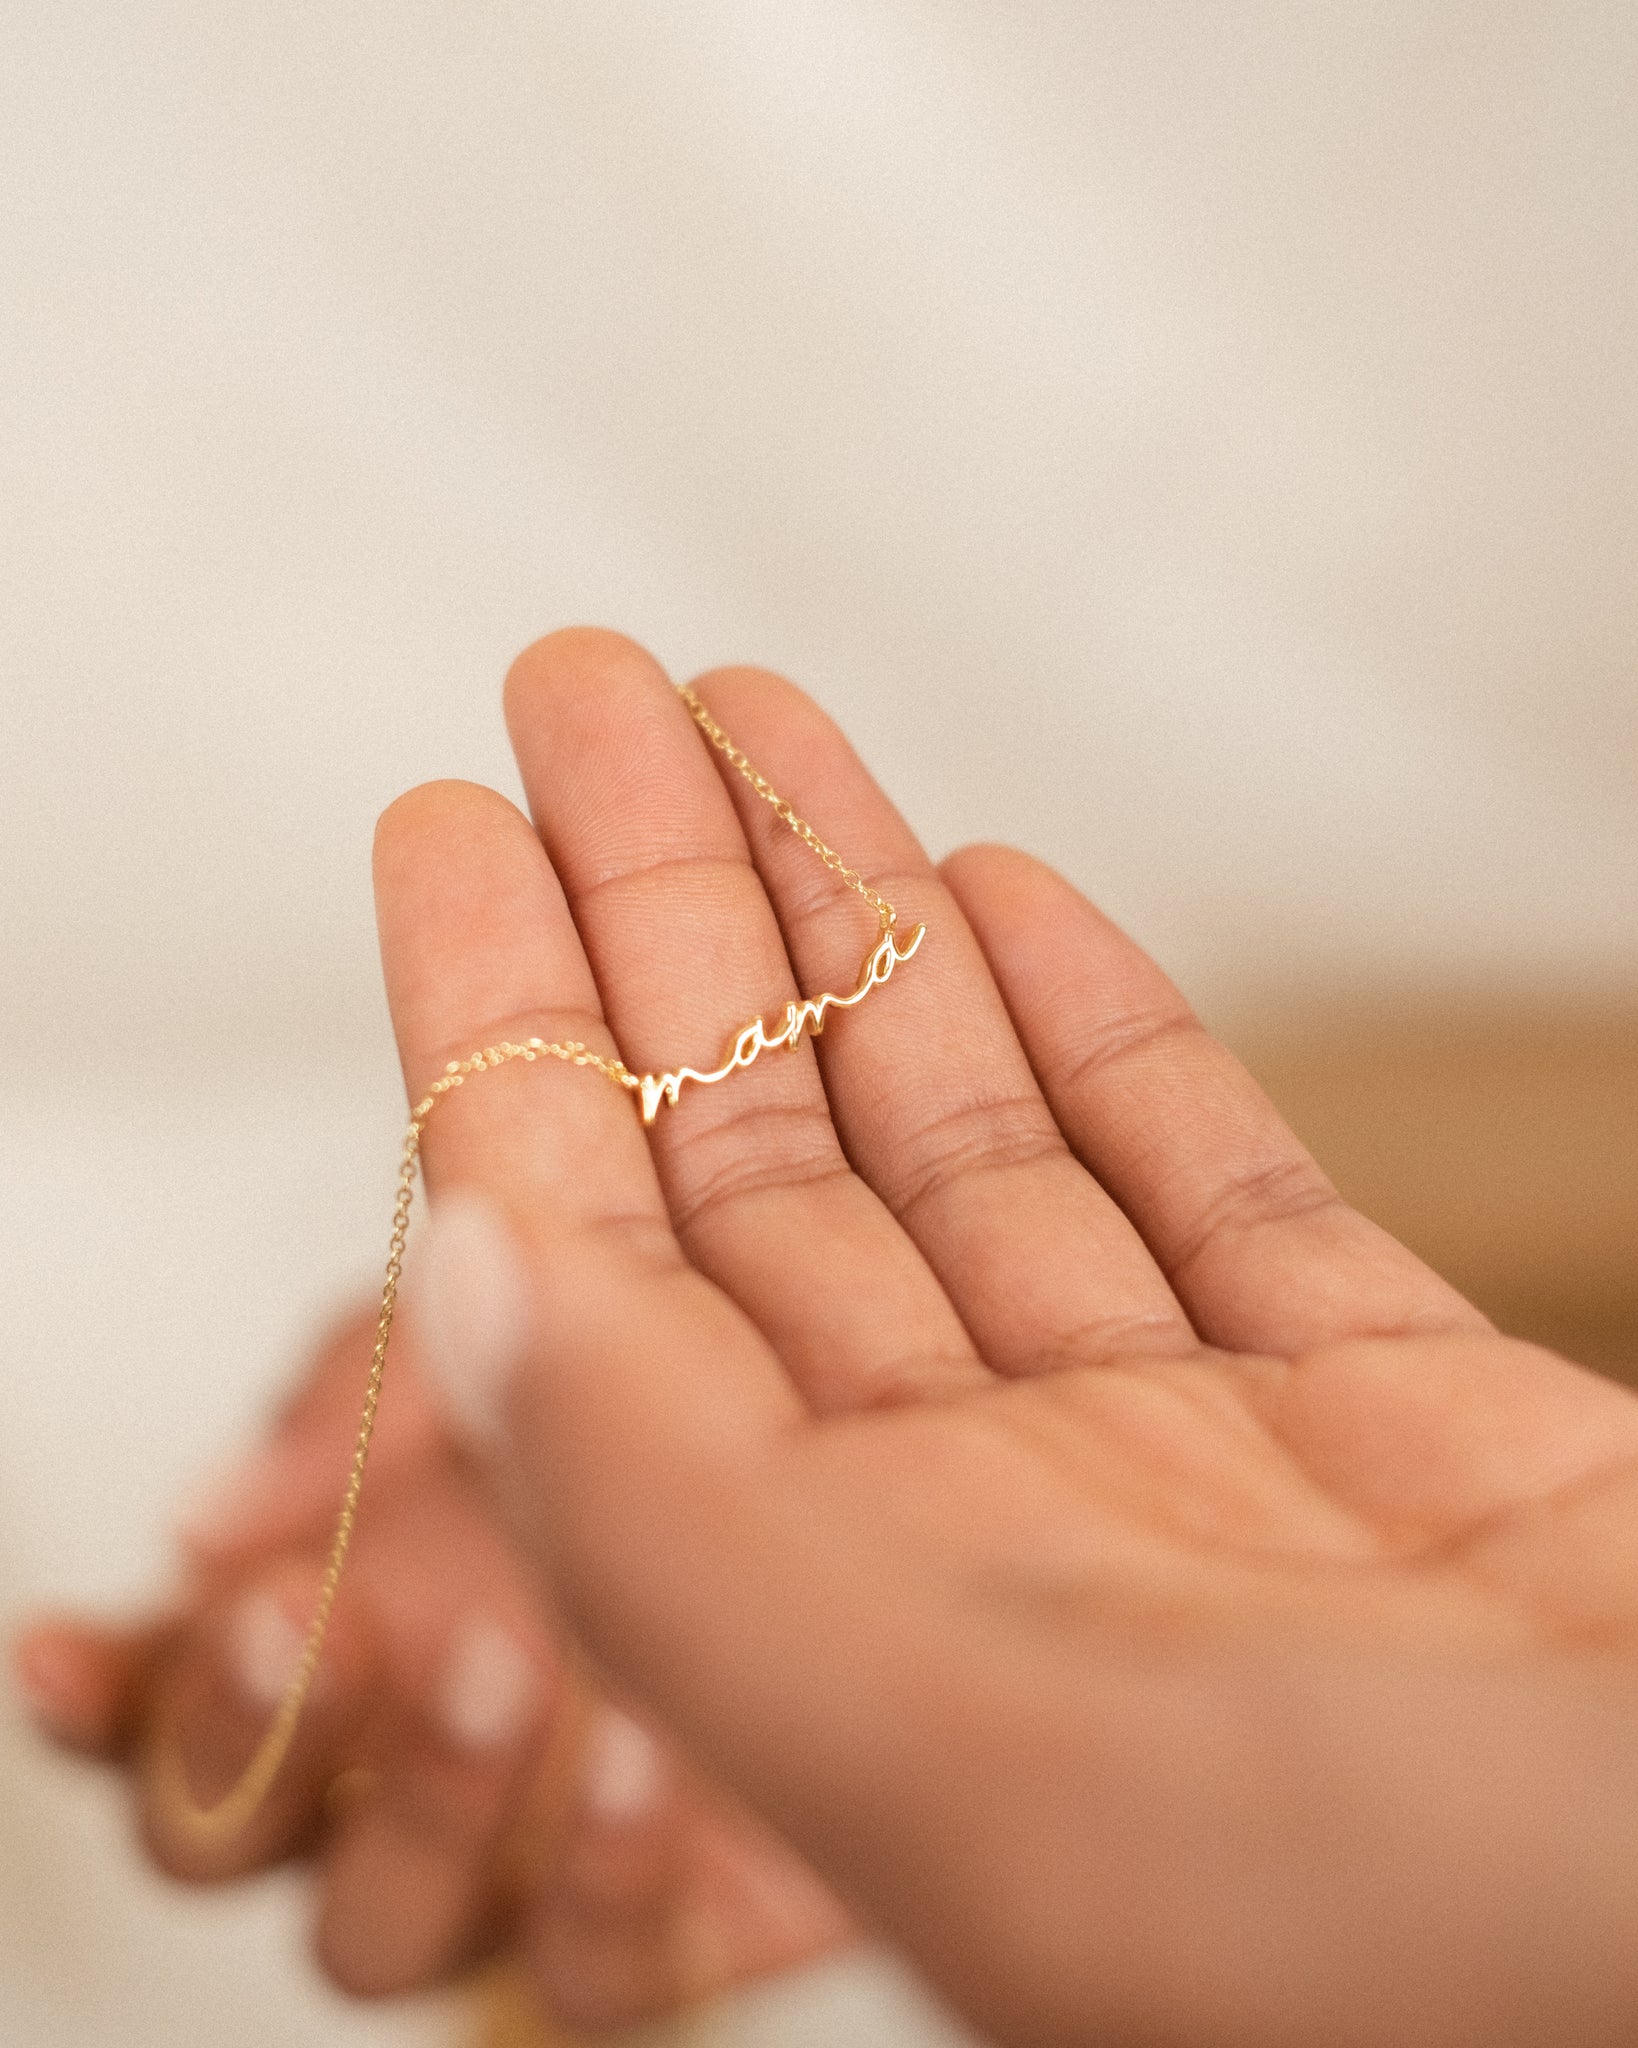 mother’s day jewelry, mother’s day necklace, mama necklace, mother necklace, mother’s day gift, sterling silver jewelry, 18k gold, dainty jewelry, dainty necklaces, mother necklace, necklace for mother, birthday gift, mama letter necklace. Mama script necklace, mother script necklace